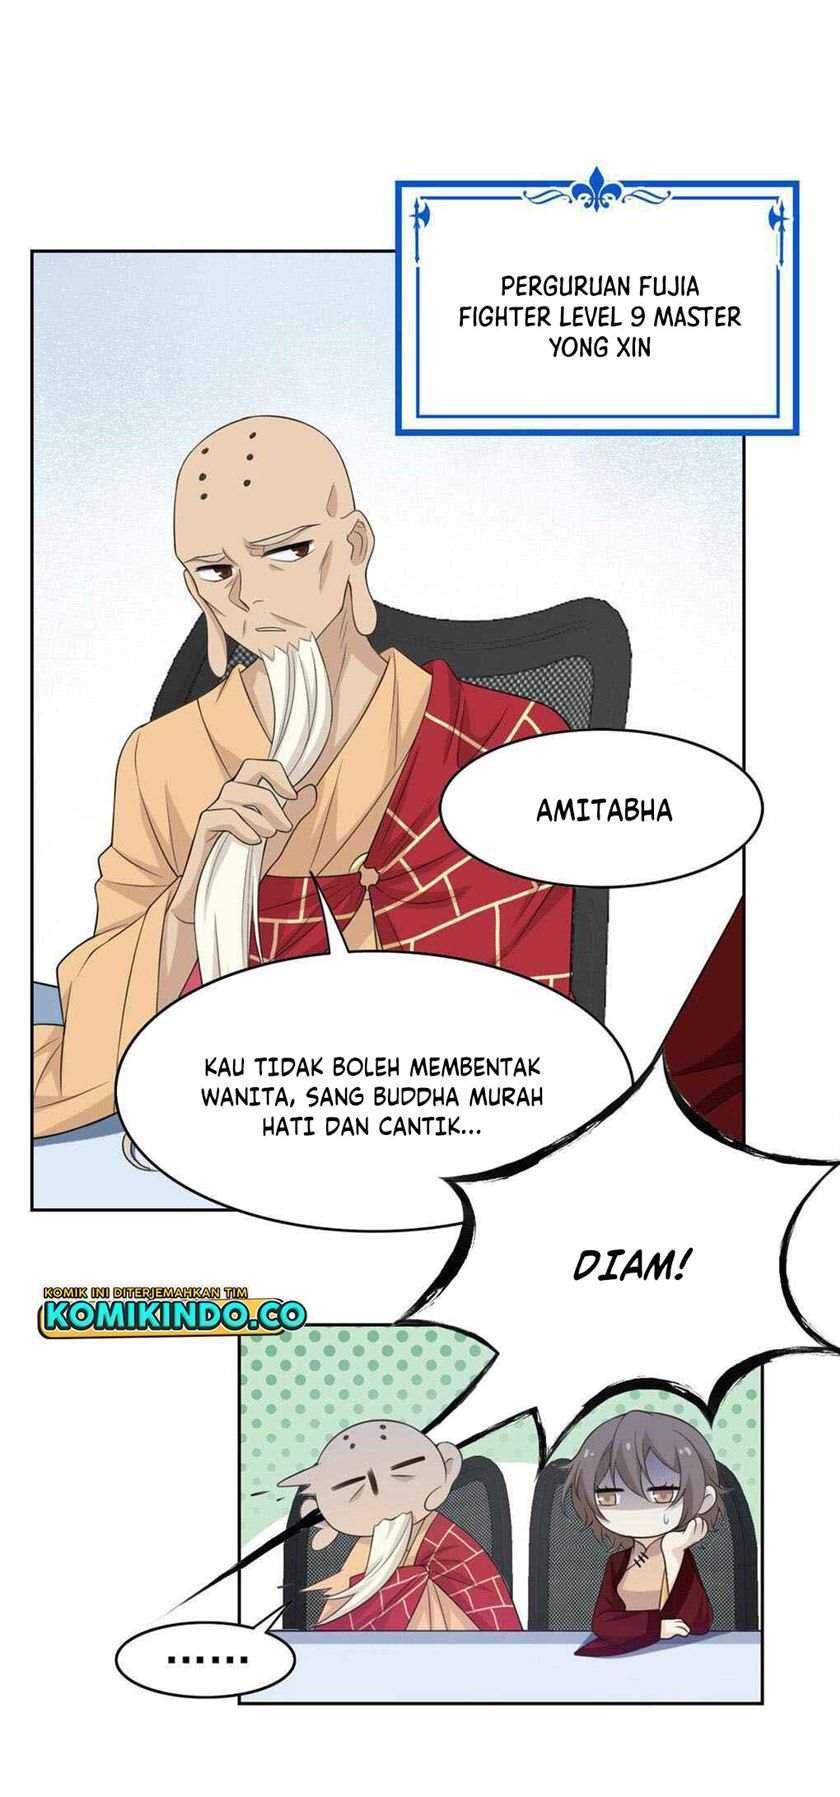 The Strong Man From the Mental Hospital Chapter 17 5